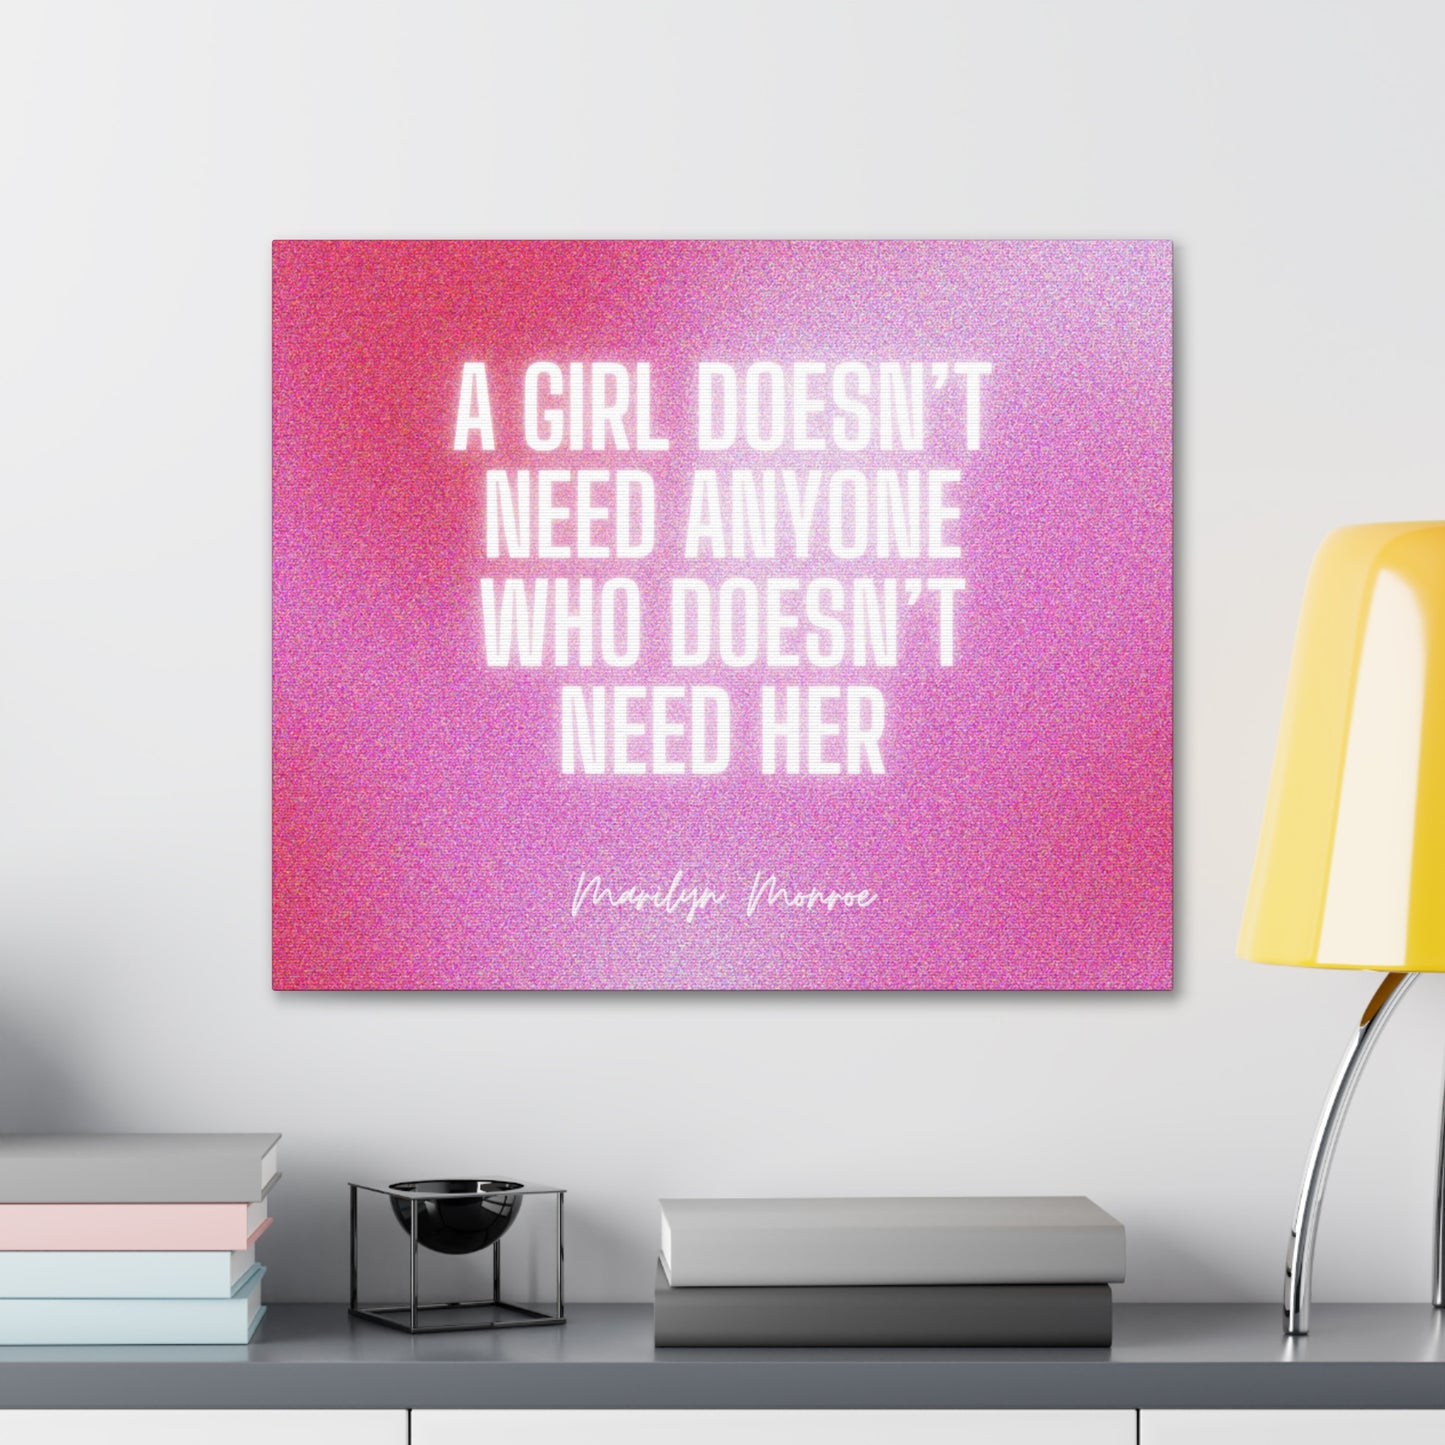 Glow White and Pink Marilyn Monroe Girl Wrapped Canvas Art Multiple Sizes